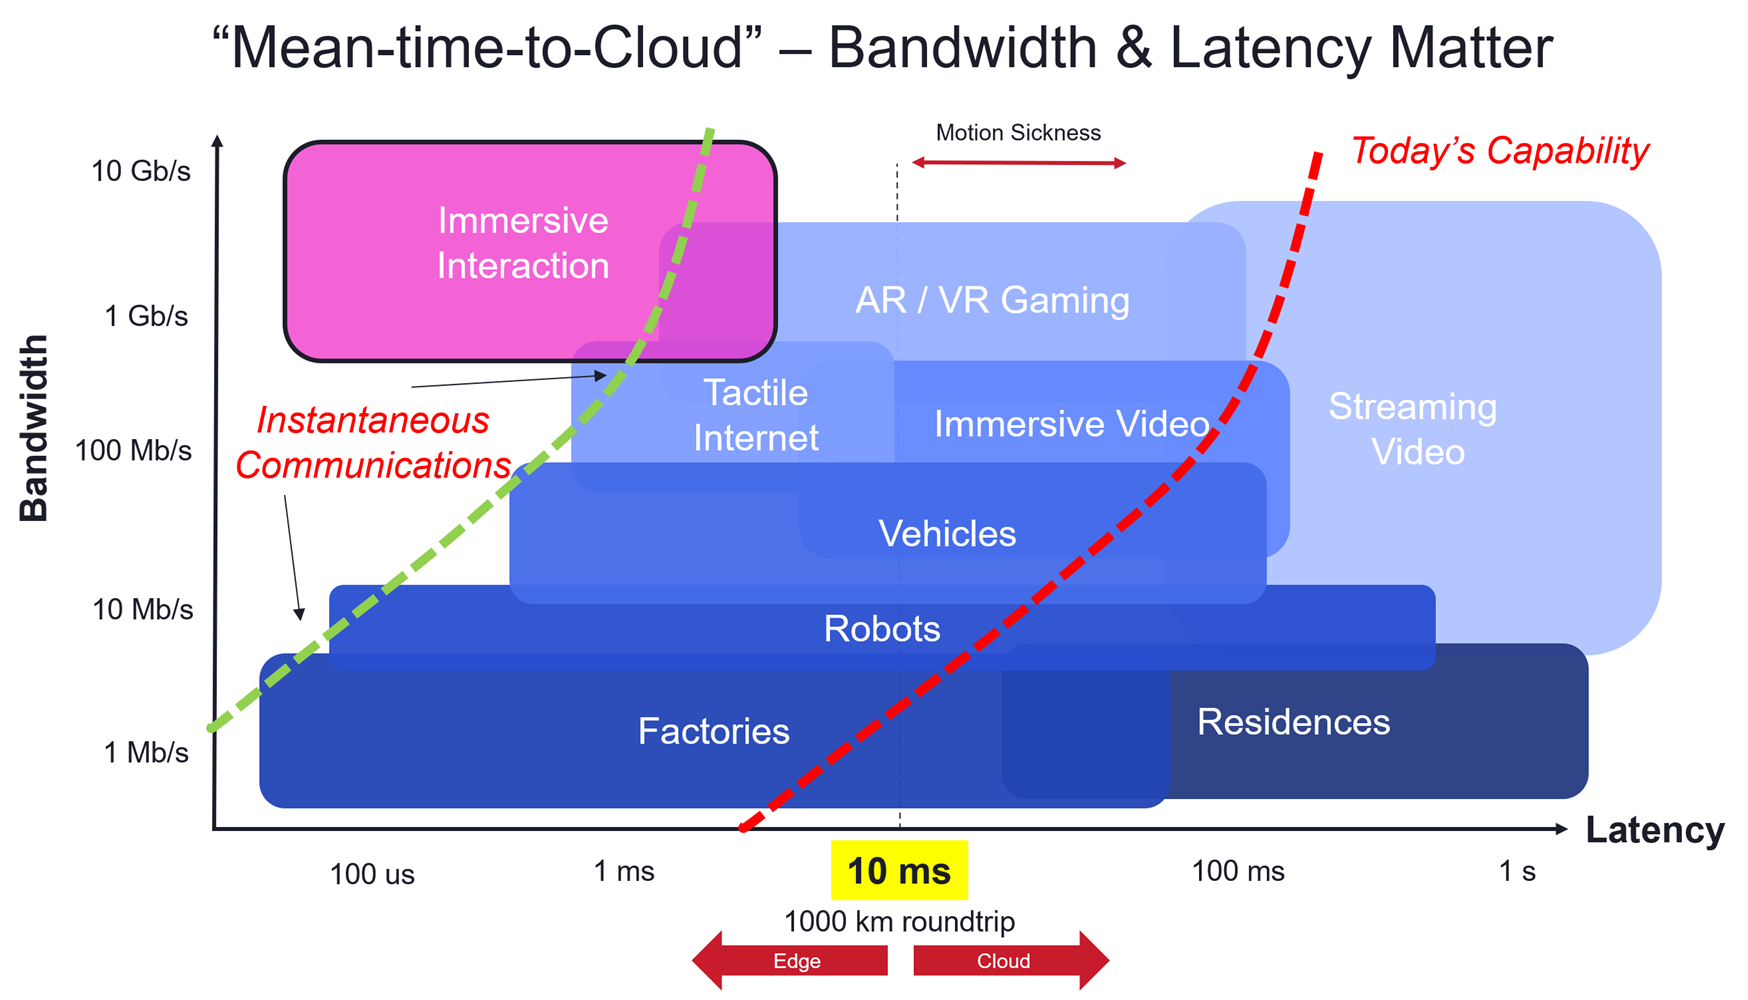 Mean-time-to-cloud: Bandwidth and Latency Matter